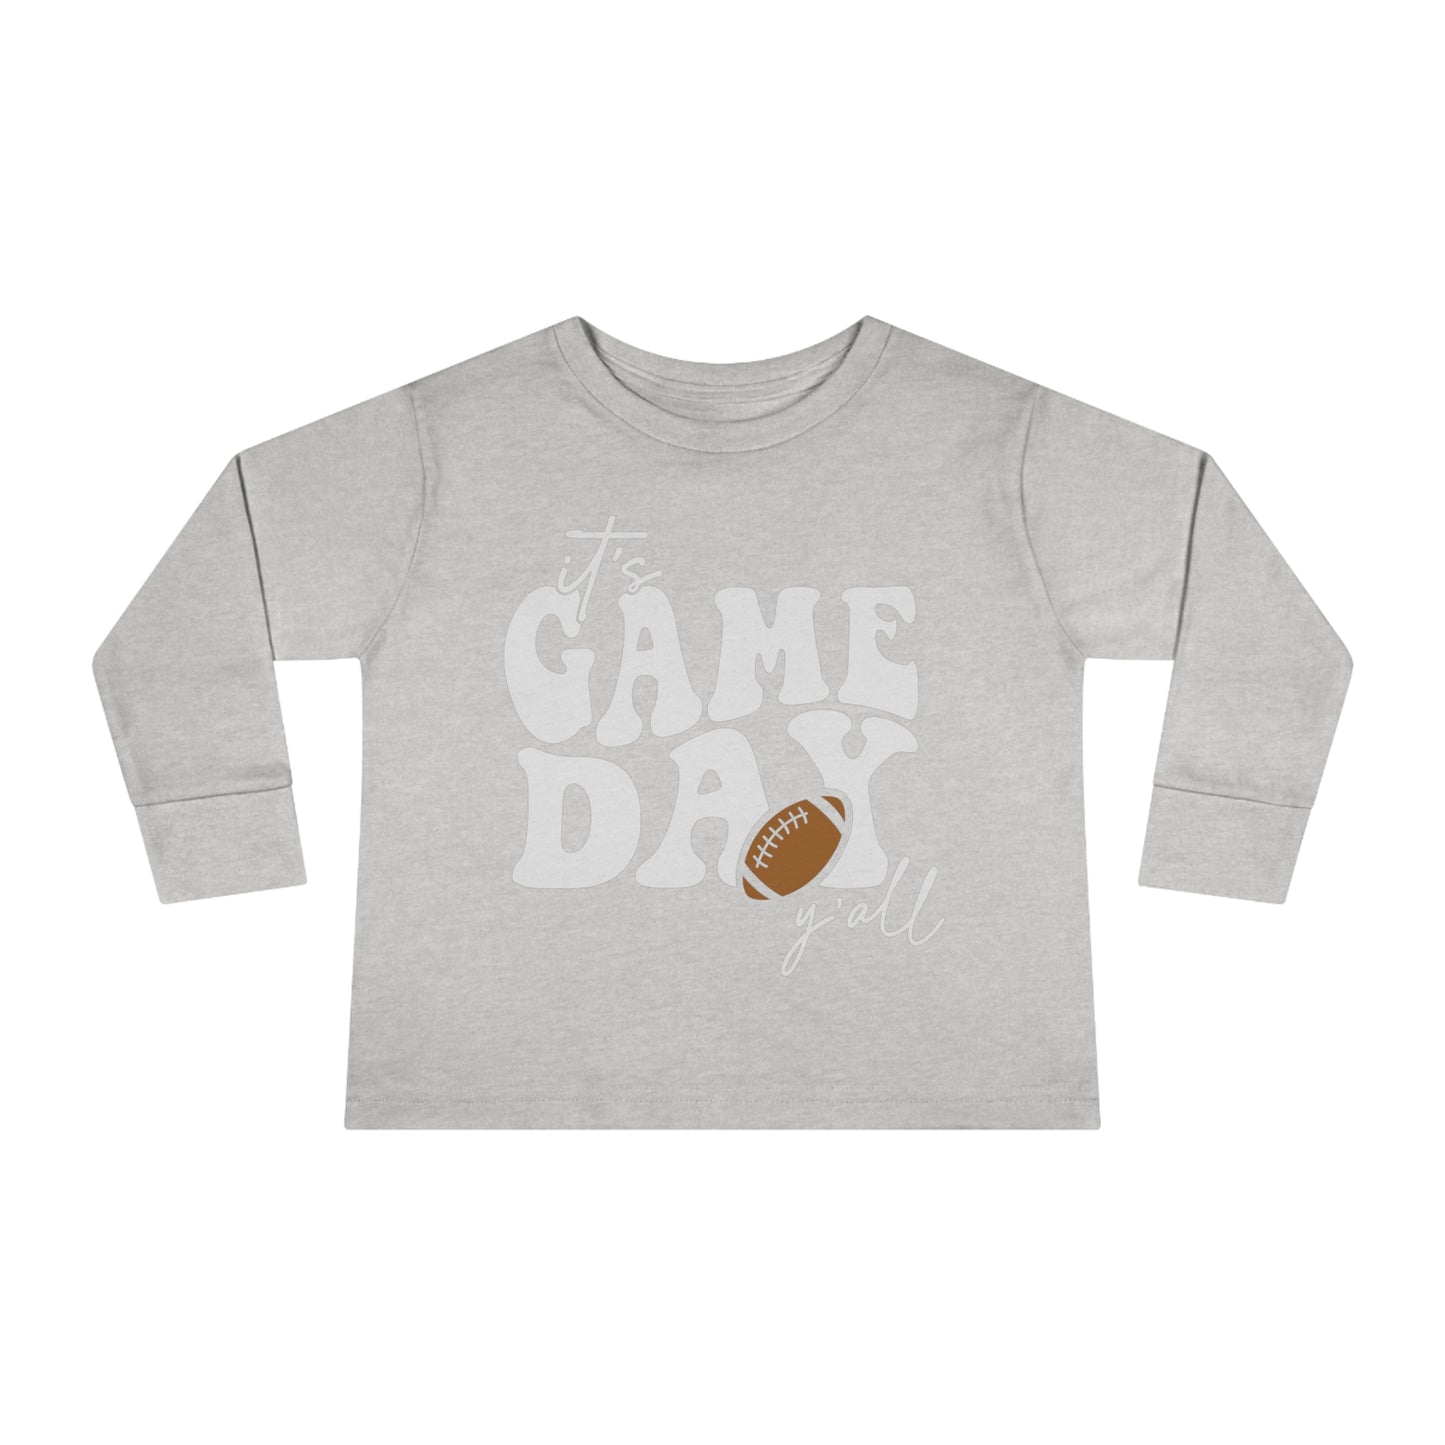 It's Game Day Ya'll  Toddler Long Sleeve Tee